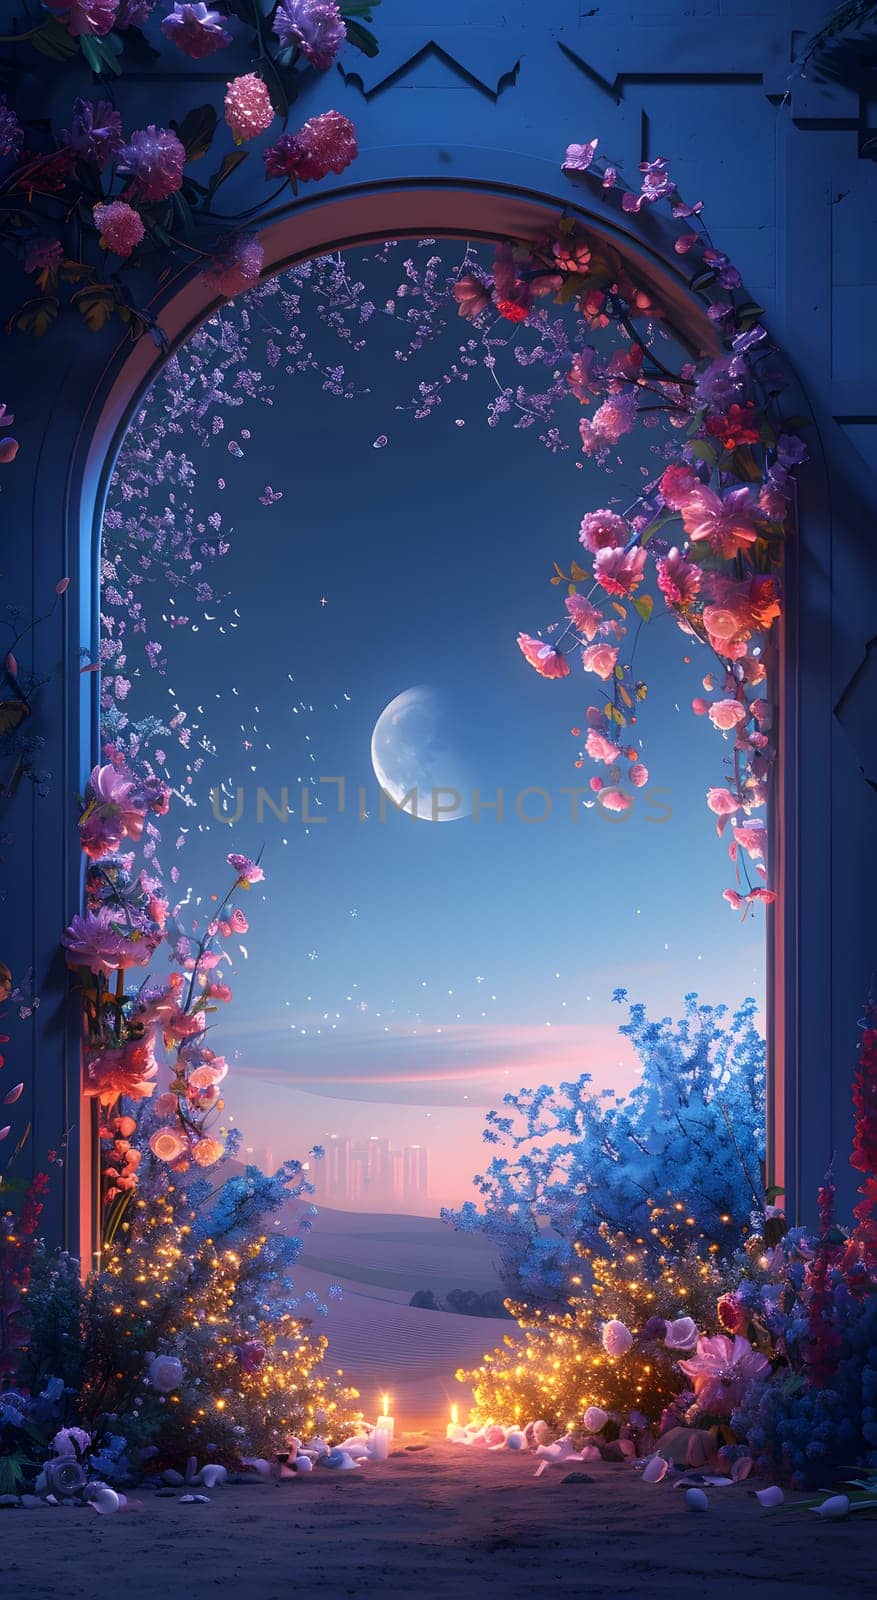 A crescent moon shines through an archway amidst blooming flowers by Nadtochiy